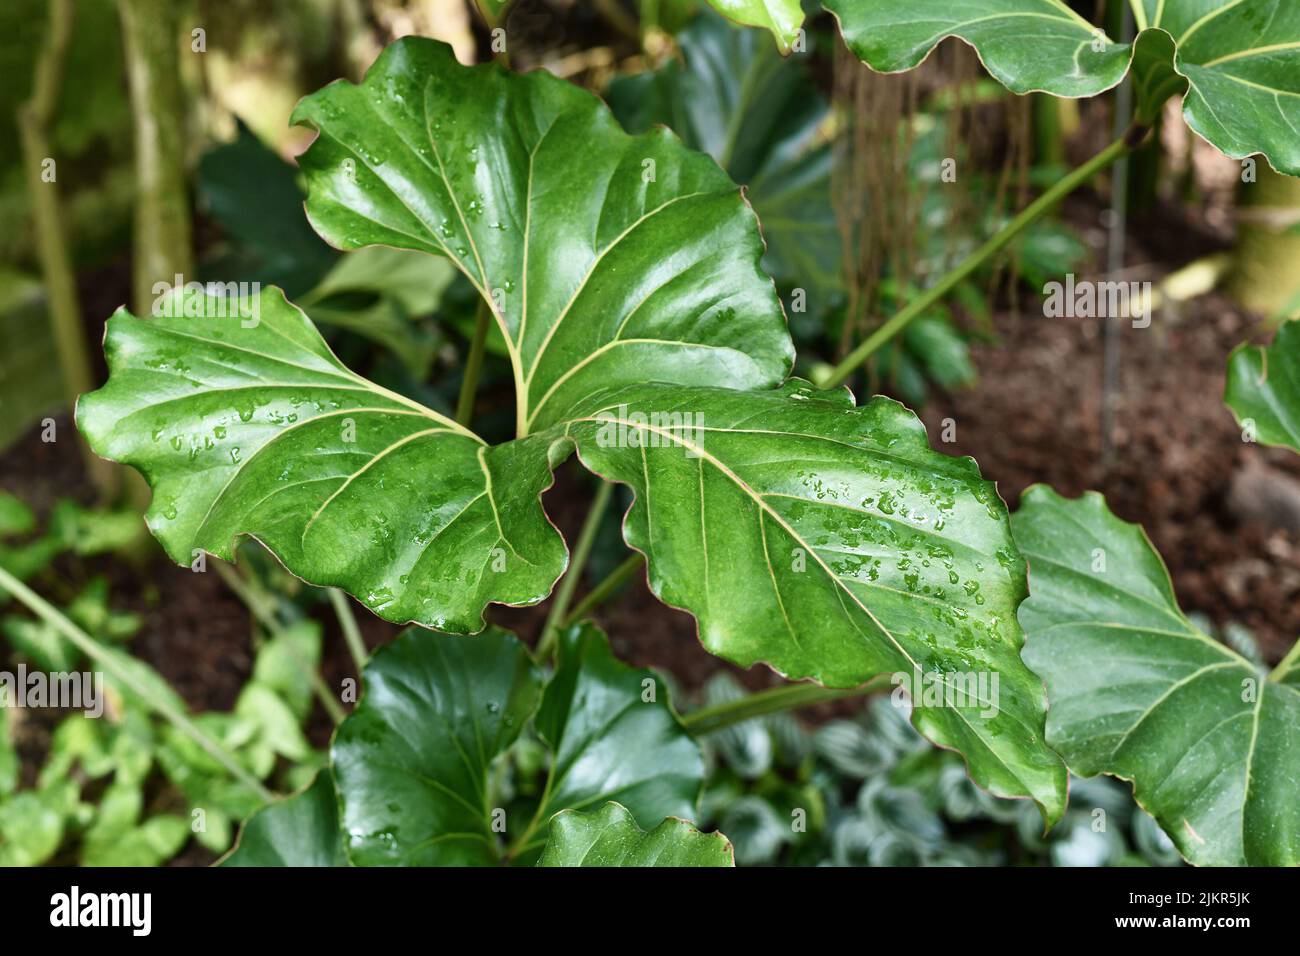 Large wavy leaf with ruffled edges of an exotic 'Anthurium Brownii' plant Stock Photo